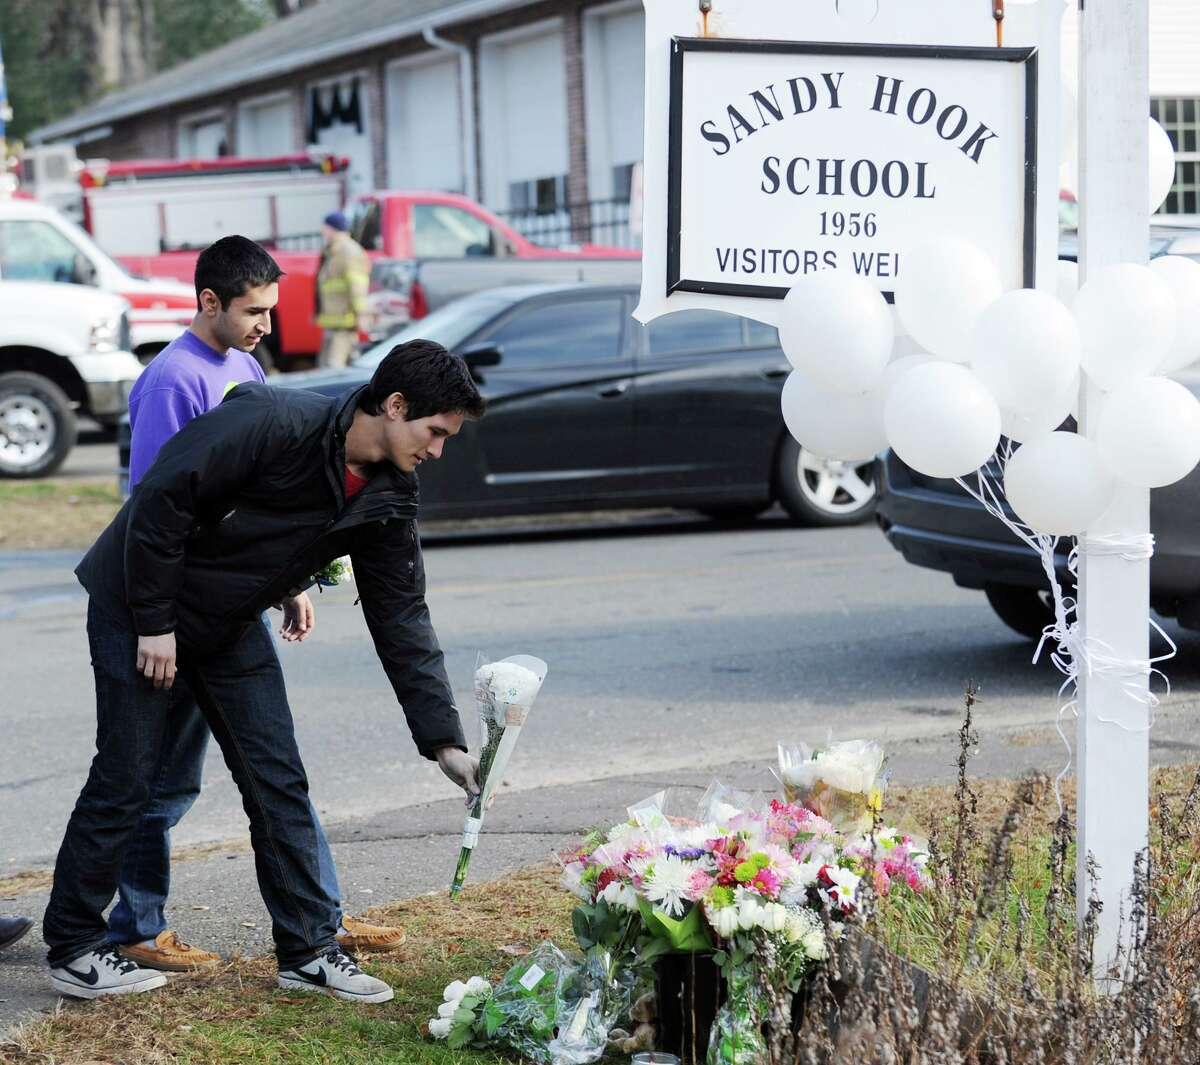 Mourners place flowers near the Sandy Hook Elementary School sign in Sandy Hook, Conn., Saturday, Dec. 15, 2012.